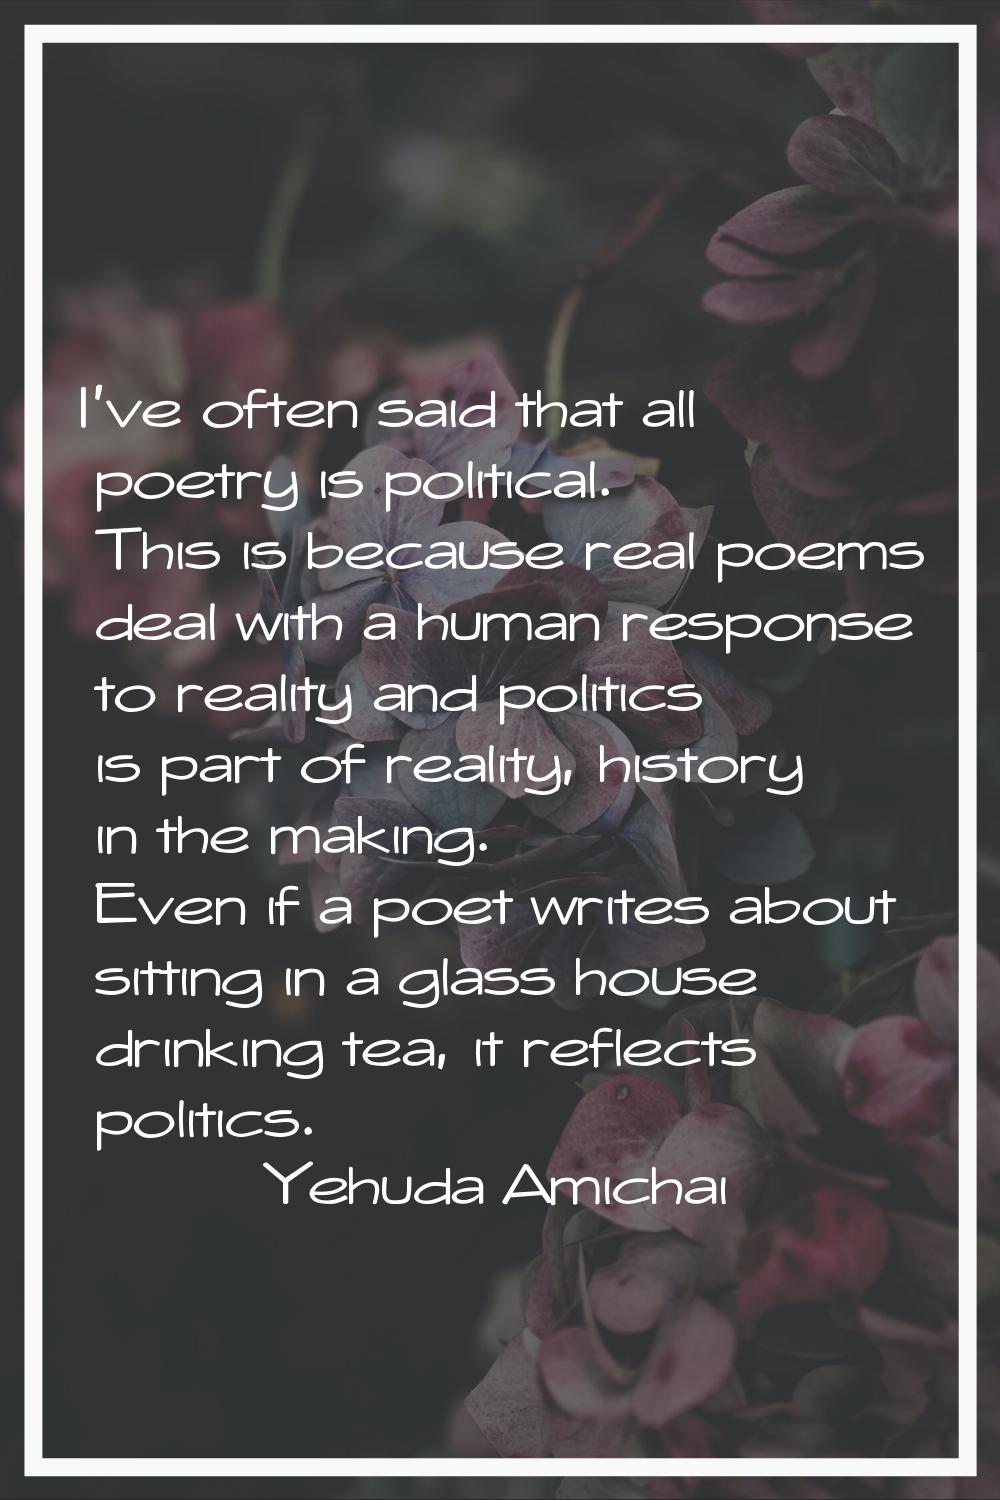 I've often said that all poetry is political. This is because real poems deal with a human response